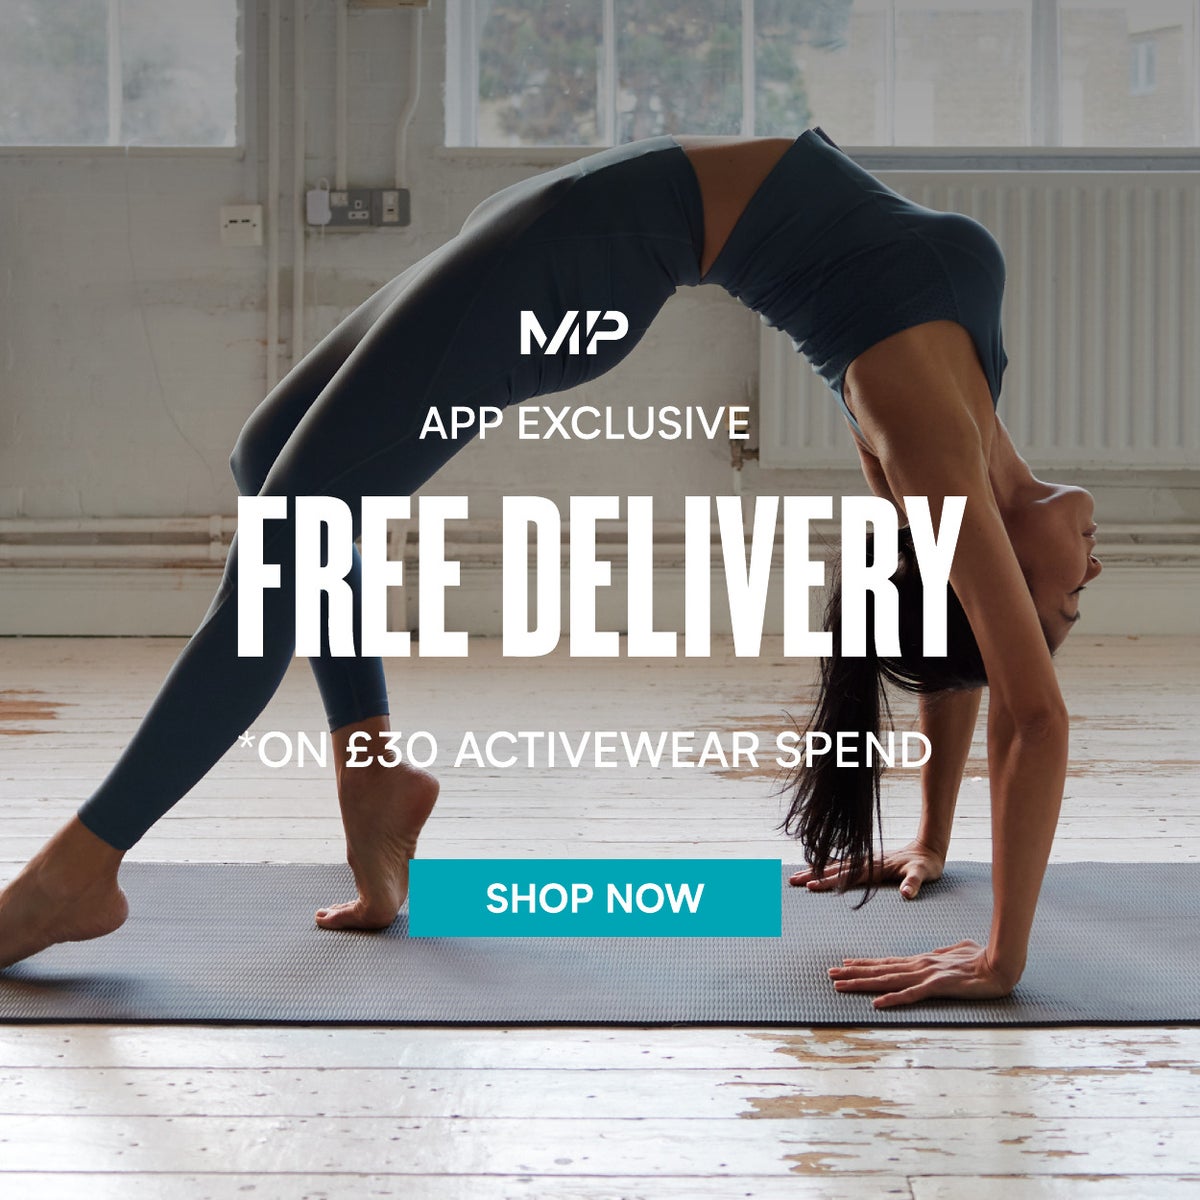 App exclusive: Free delivery on £30 Activewear spend. Shop now.